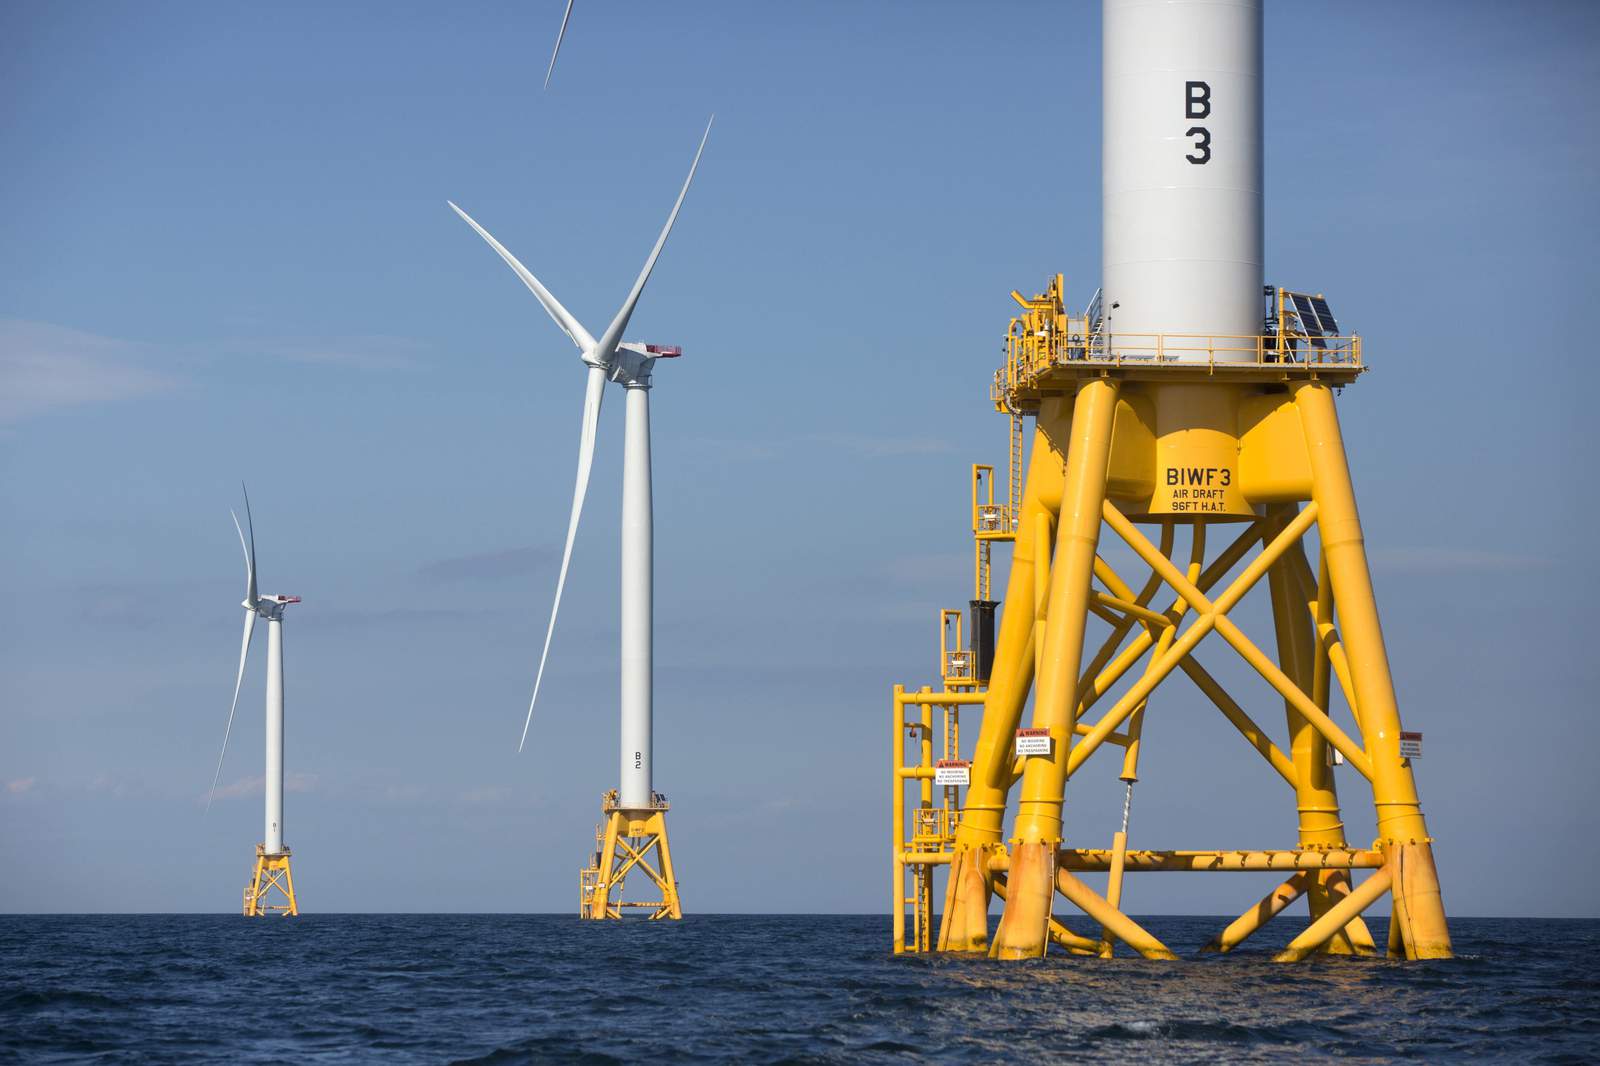 Biden hopes to boost offshore wind as Mass. project advances